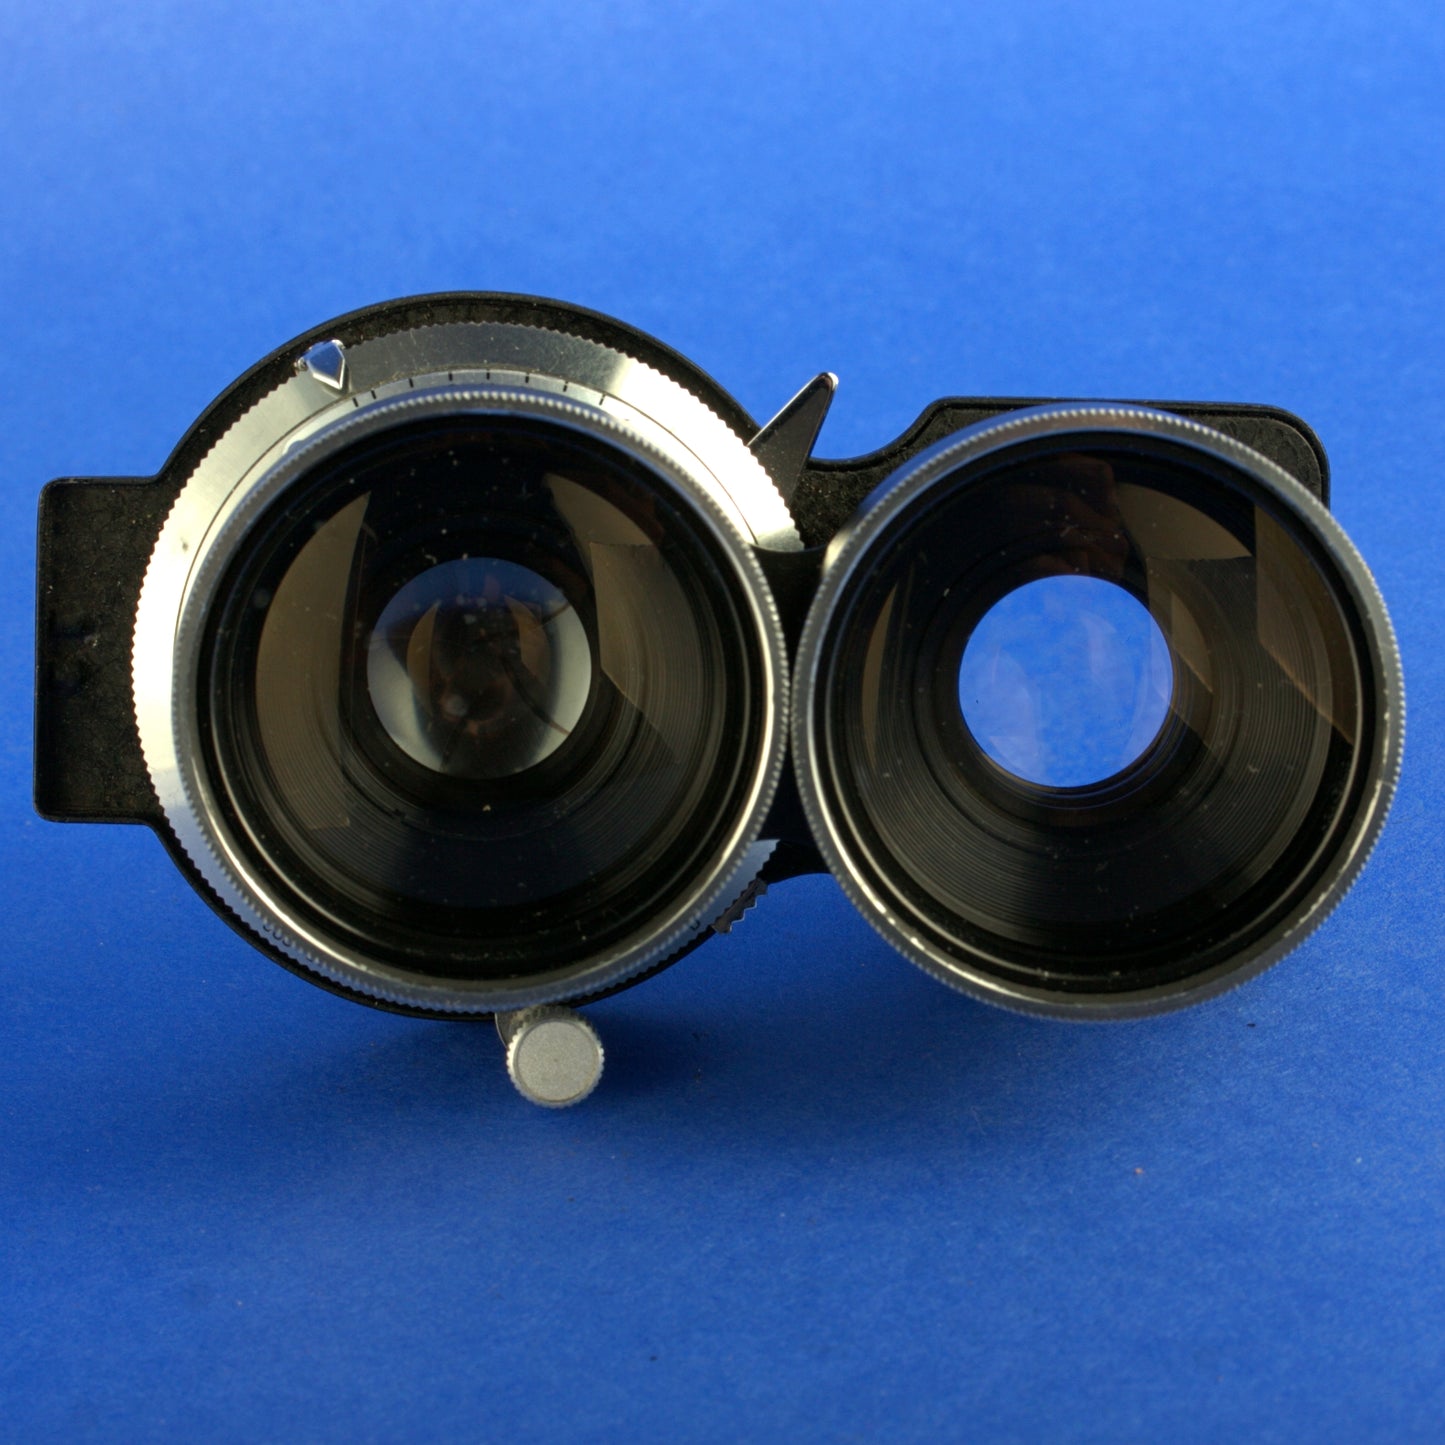 Mamiya 65mm 3.5 TLR Lens For C220, C330 Cameras Not Working